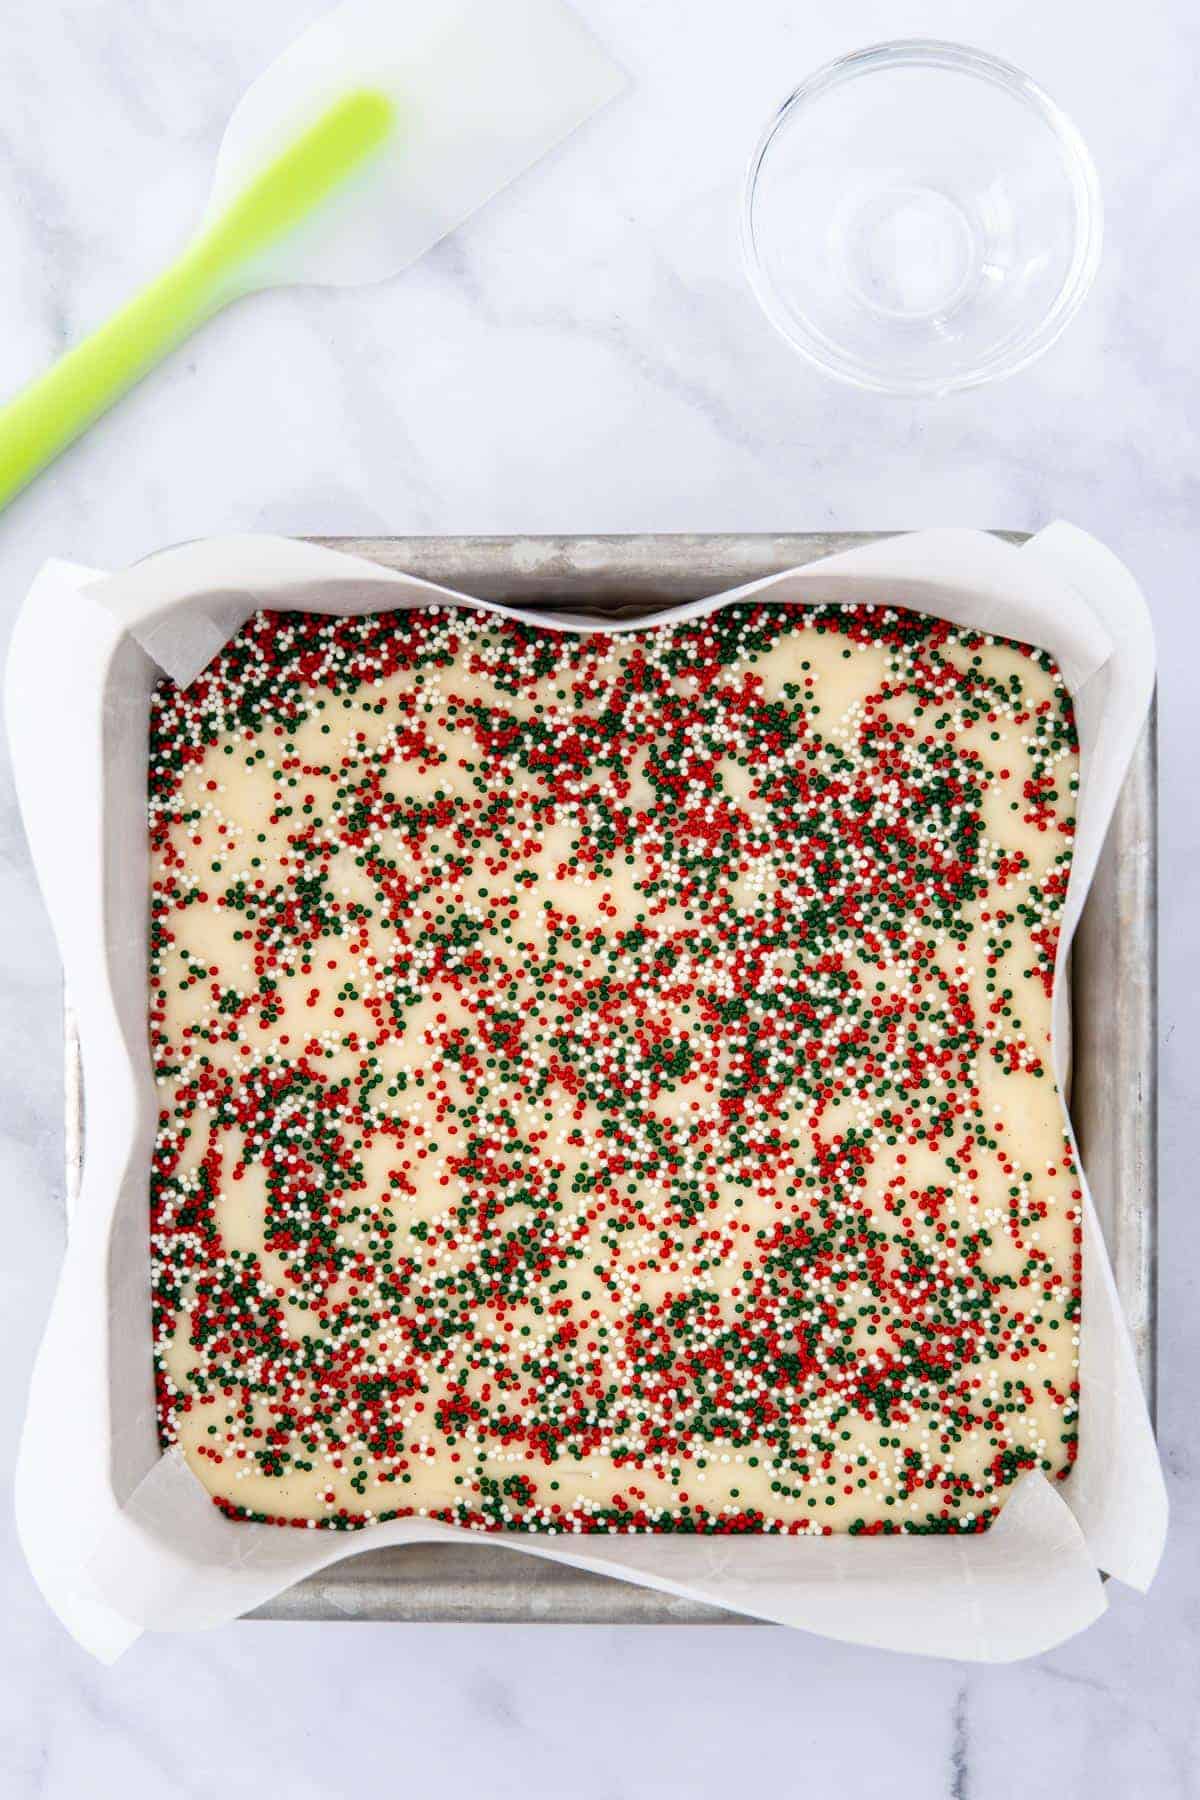 Sugar cookie fudge in an 8x8 inch pan with Christmas sprinkles on top.